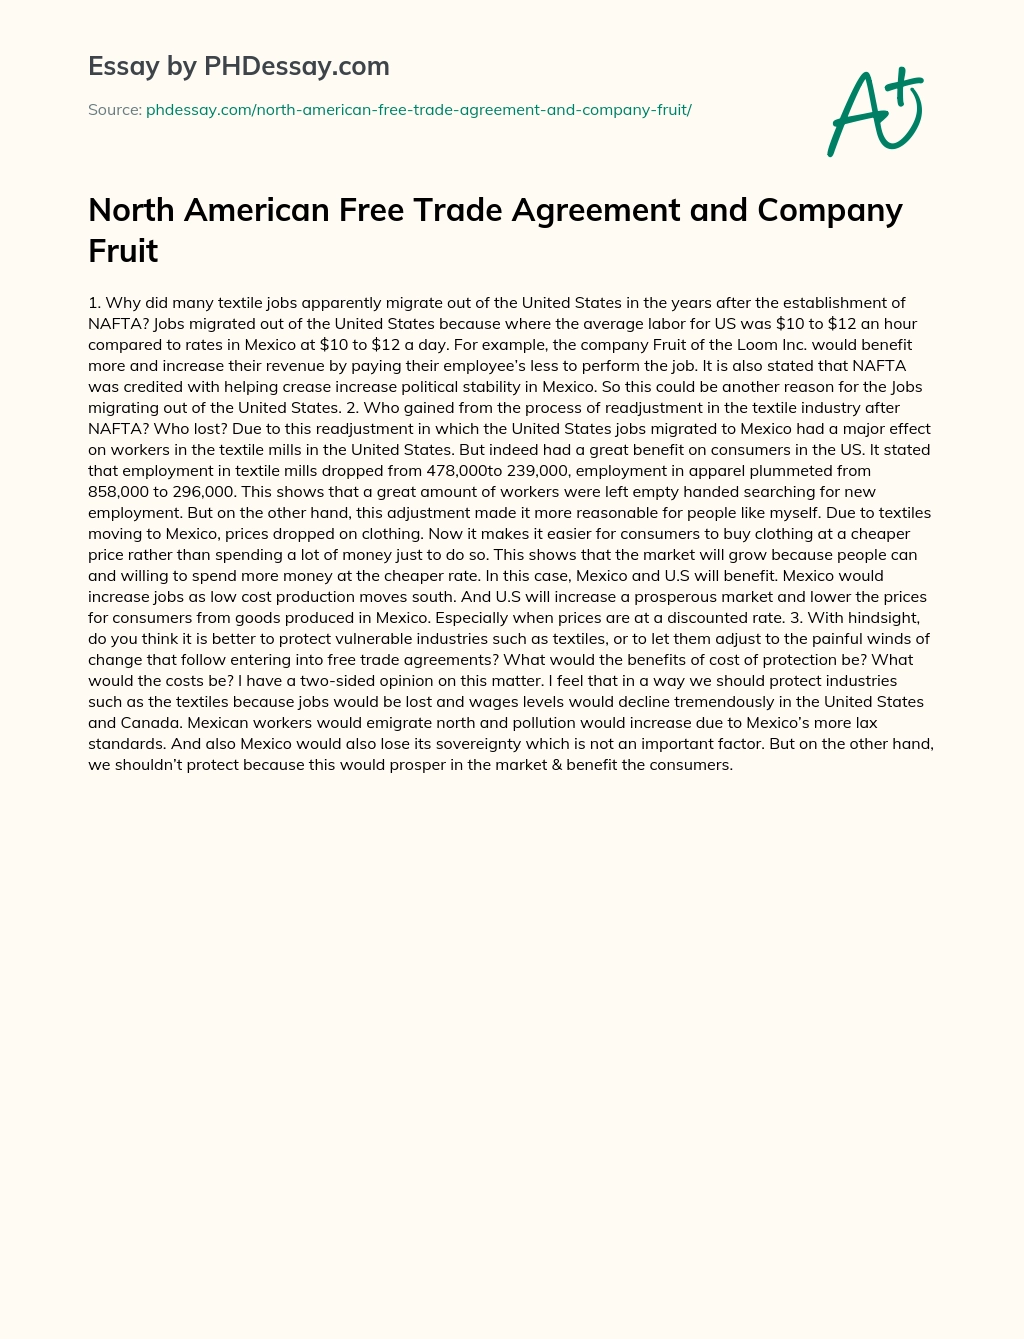 North American Free Trade Agreement and Company Fruit essay